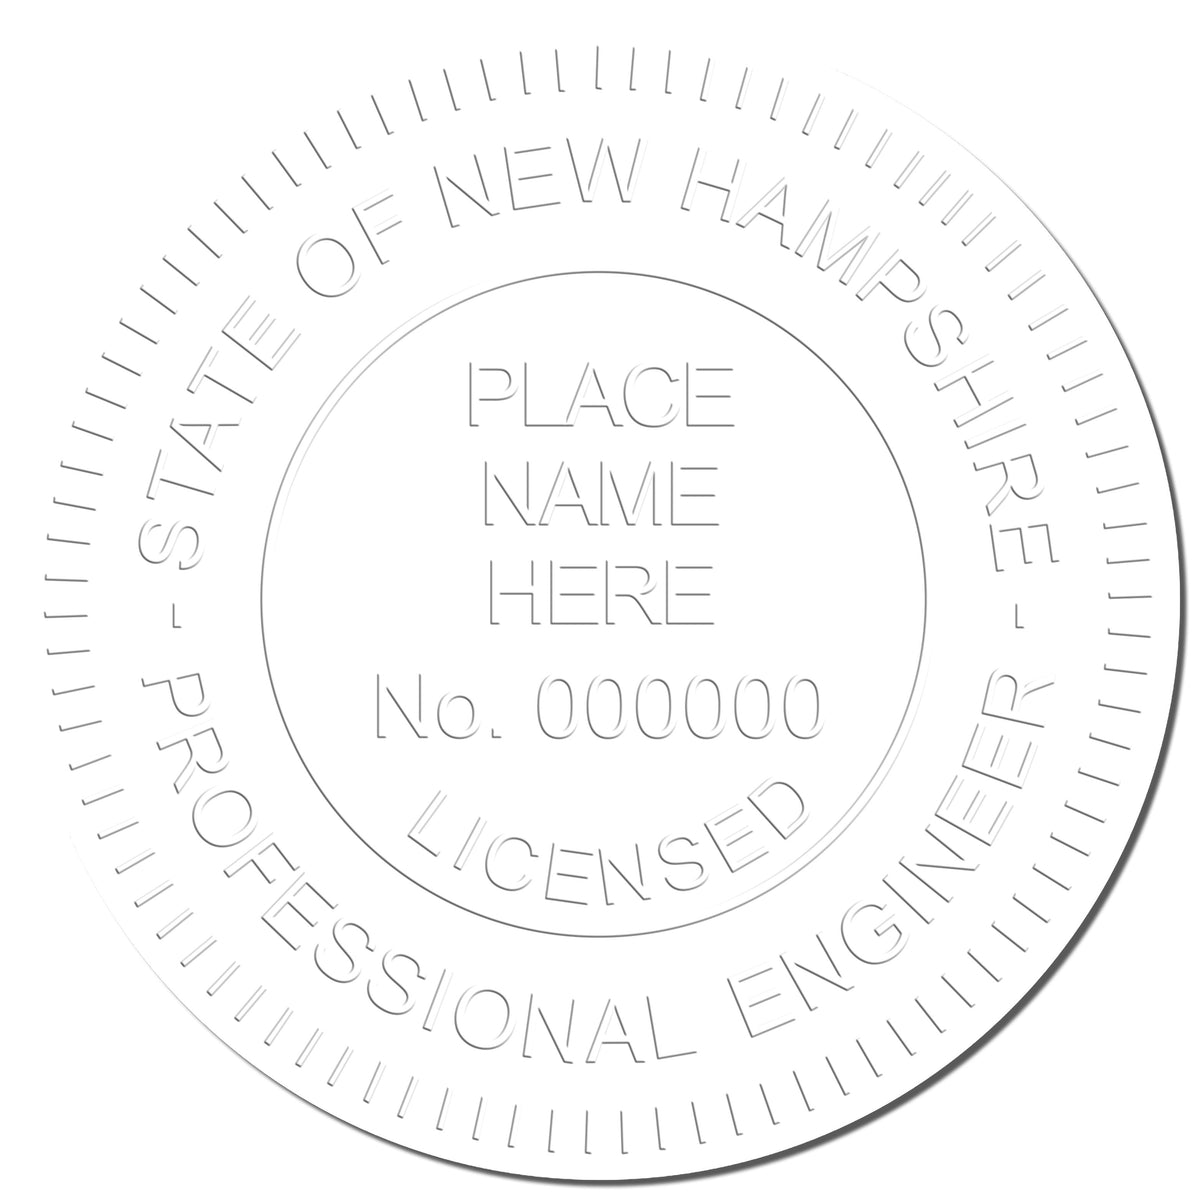 This paper is stamped with a sample imprint of the State of New Hampshire Extended Long Reach Engineer Seal, signifying its quality and reliability.